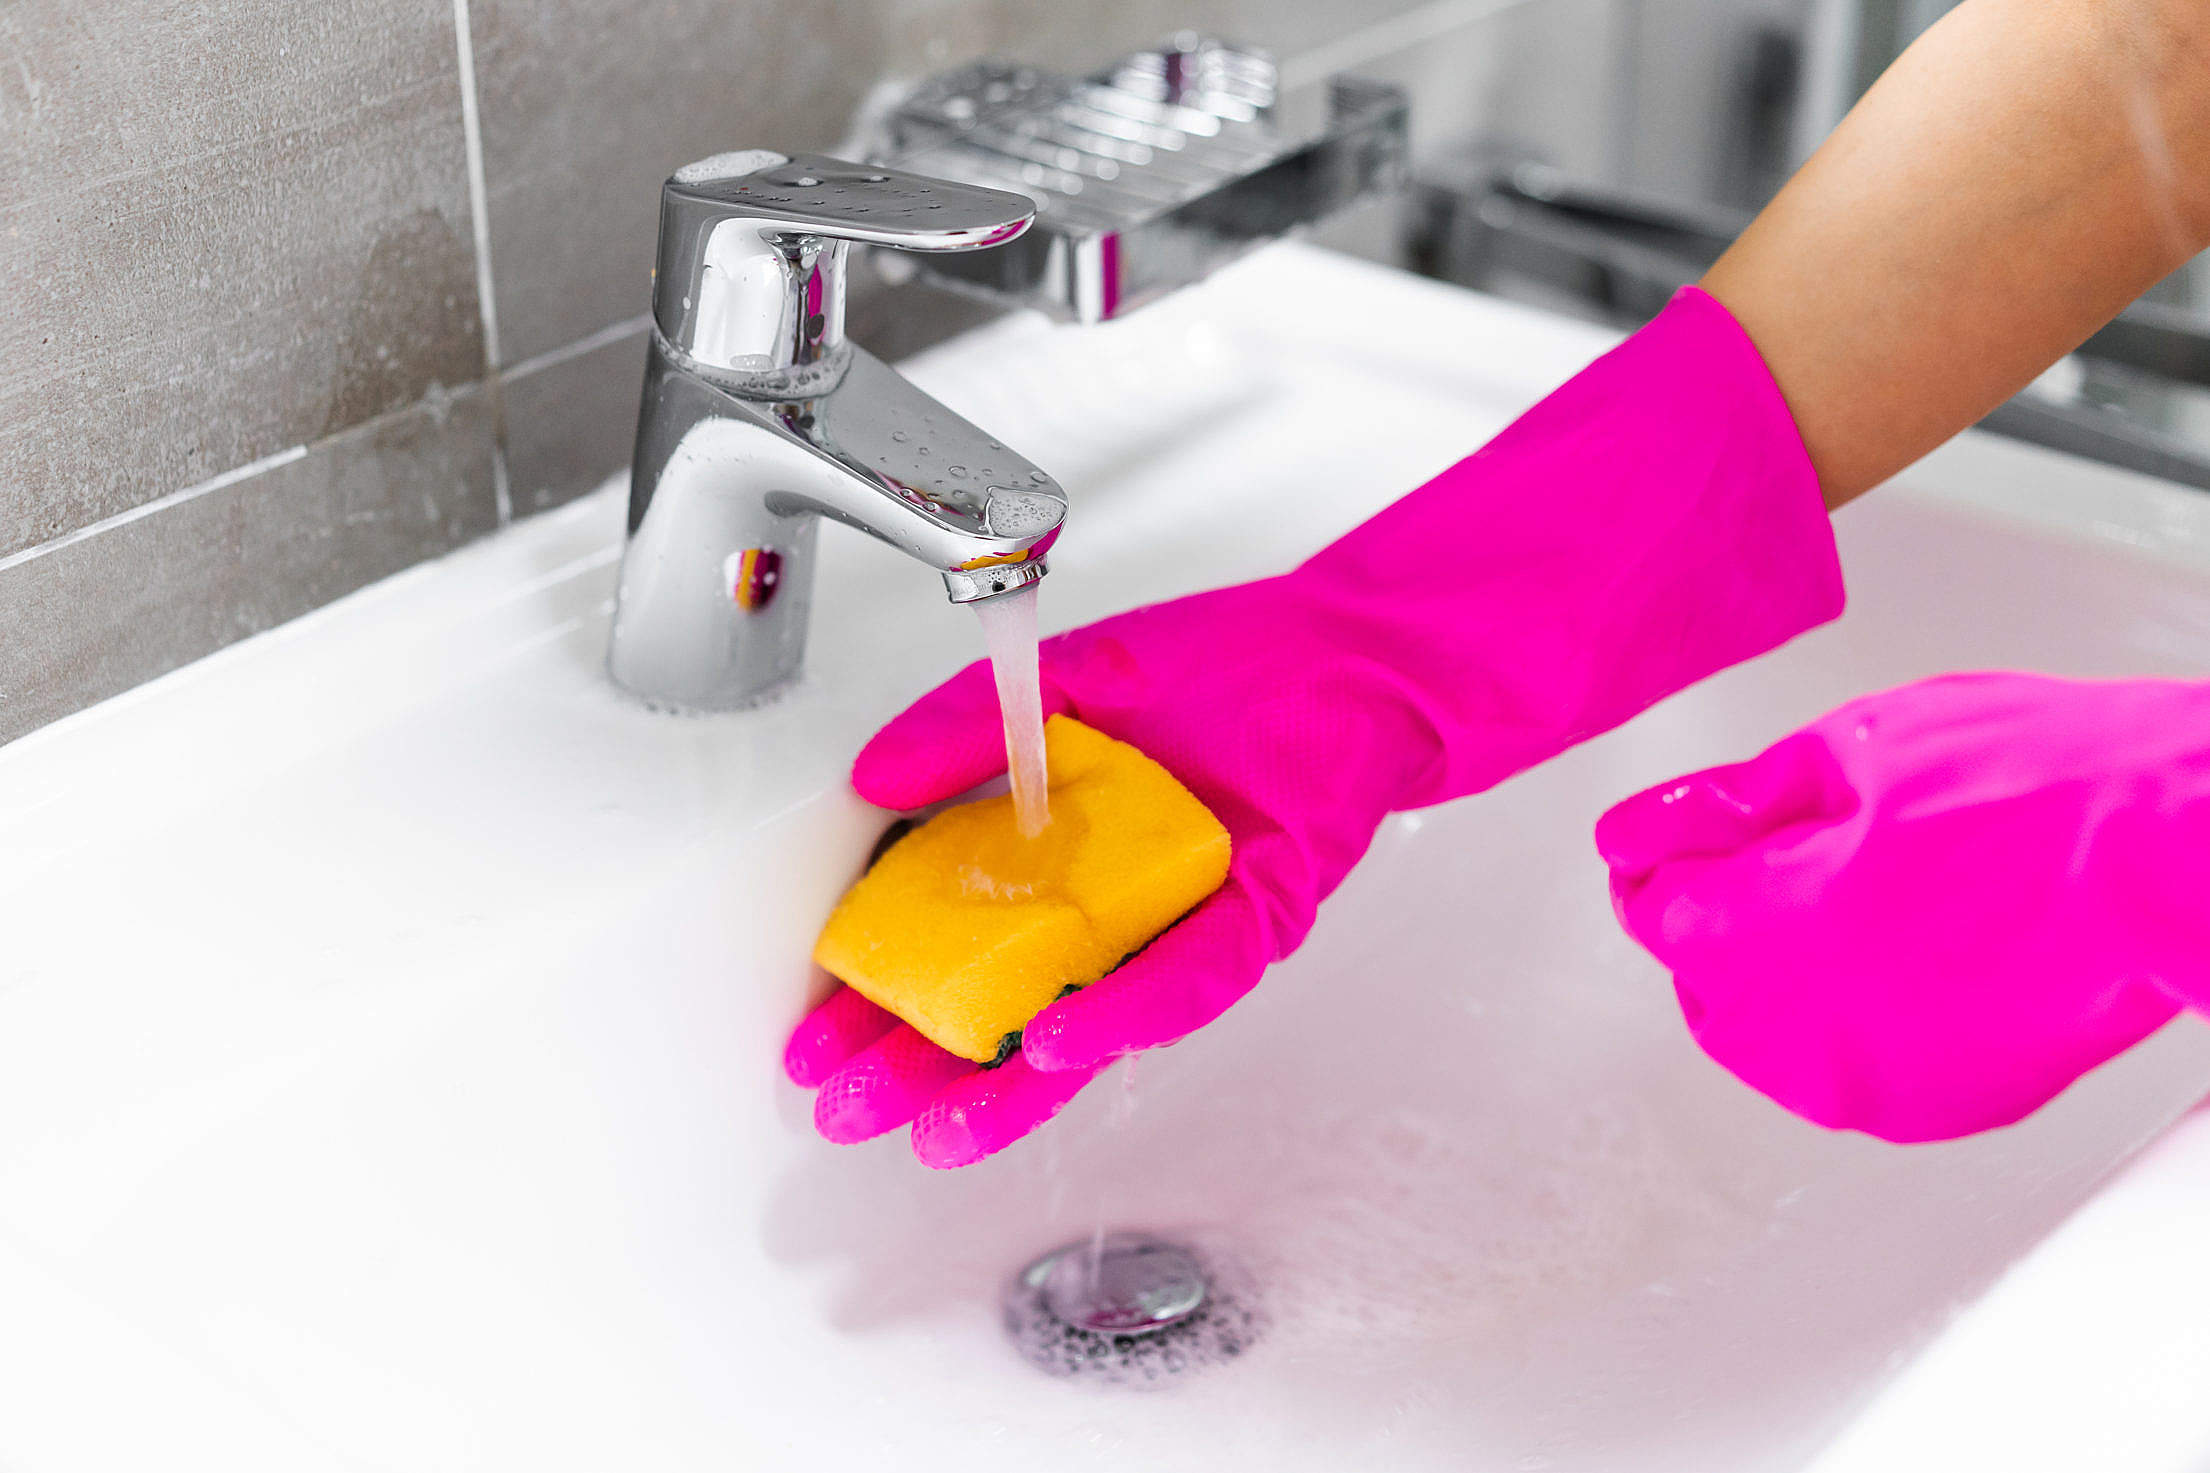 Hands in Pink Gloves Washing a Washbasin with a Sponge Free Stock Photo